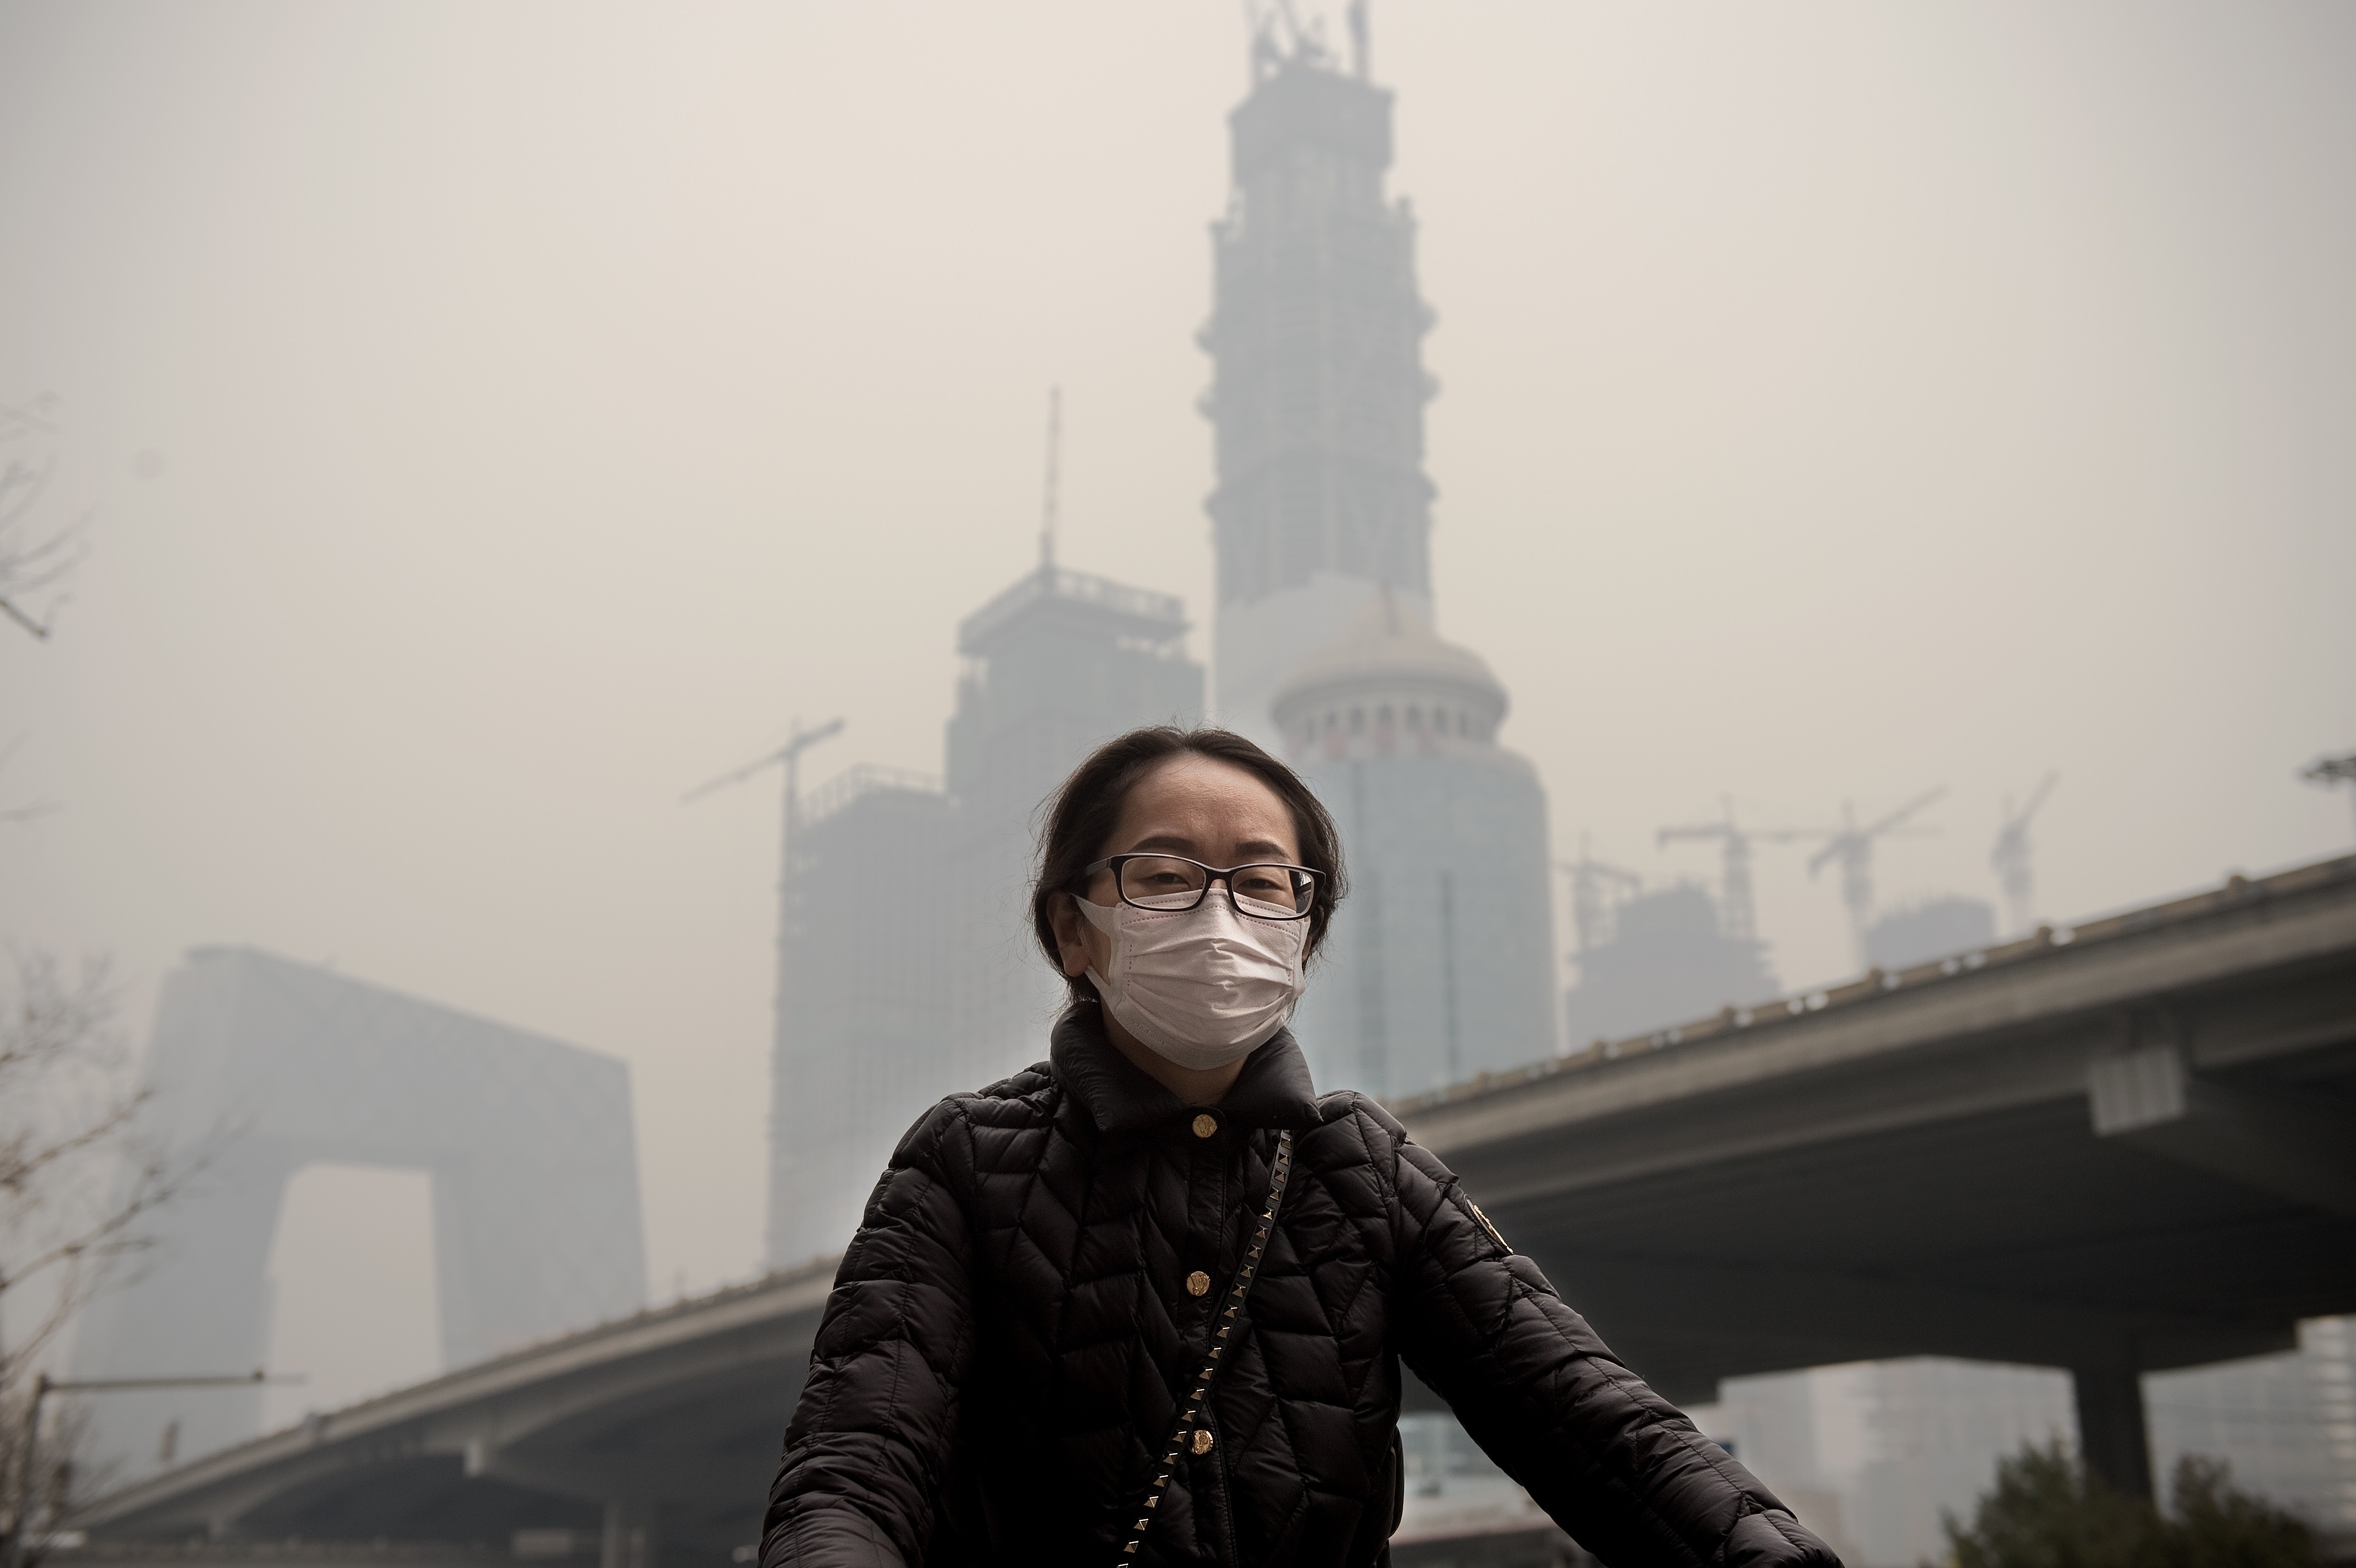 A woman wearing a protective pollution mask rides a bicycle in Beijing on March 20, 2017, when the last large coal-fired power plant in the city suspended operations. China’s real estate companies are now coming together to green their supply chains. Photo: AFP